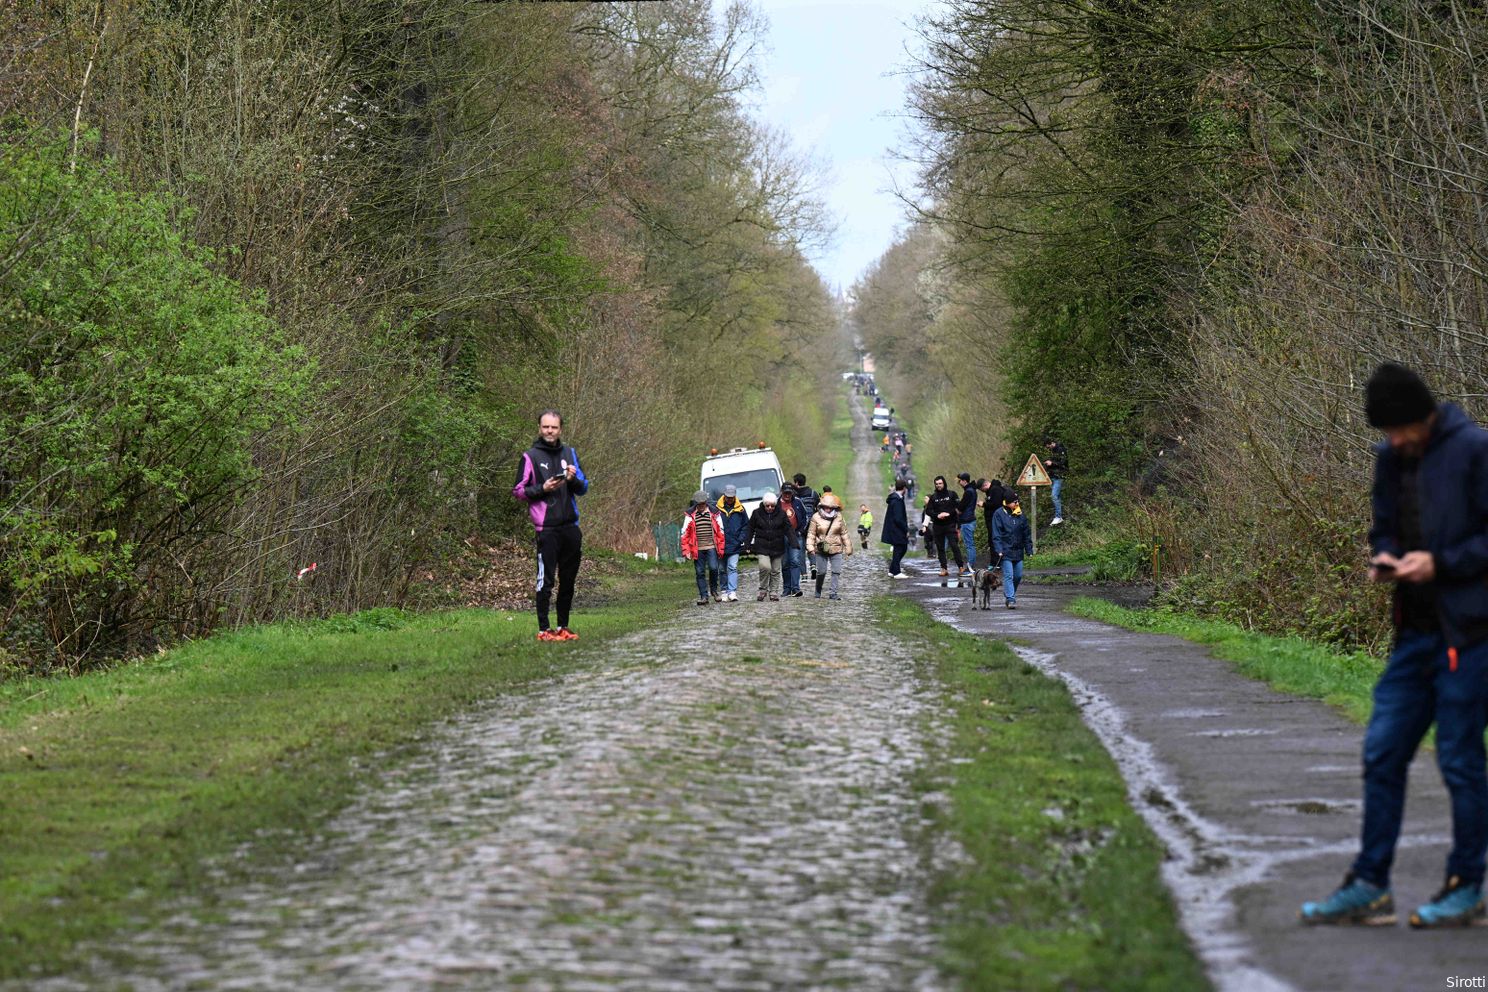 📸 Scouting Paris-Roubaix: The chicane, wet cobblestones, and "Stay strong Wout" in the Arenberg Forest